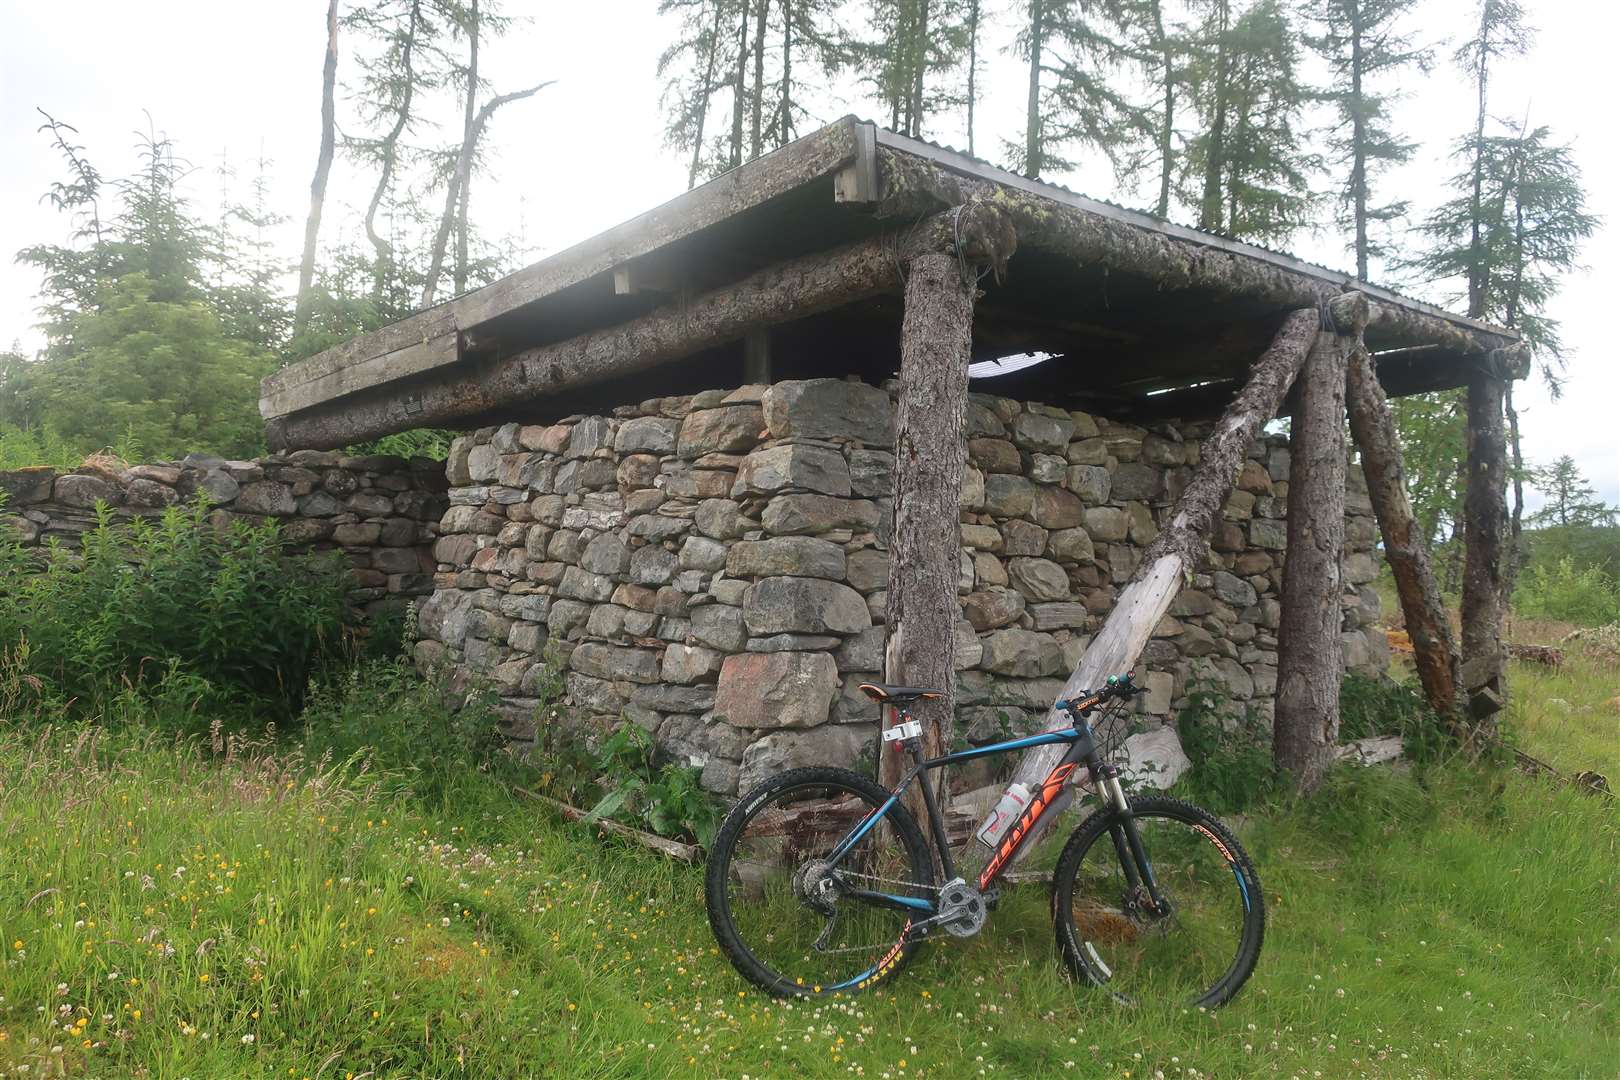 The bothy offers a great spot for shelter.